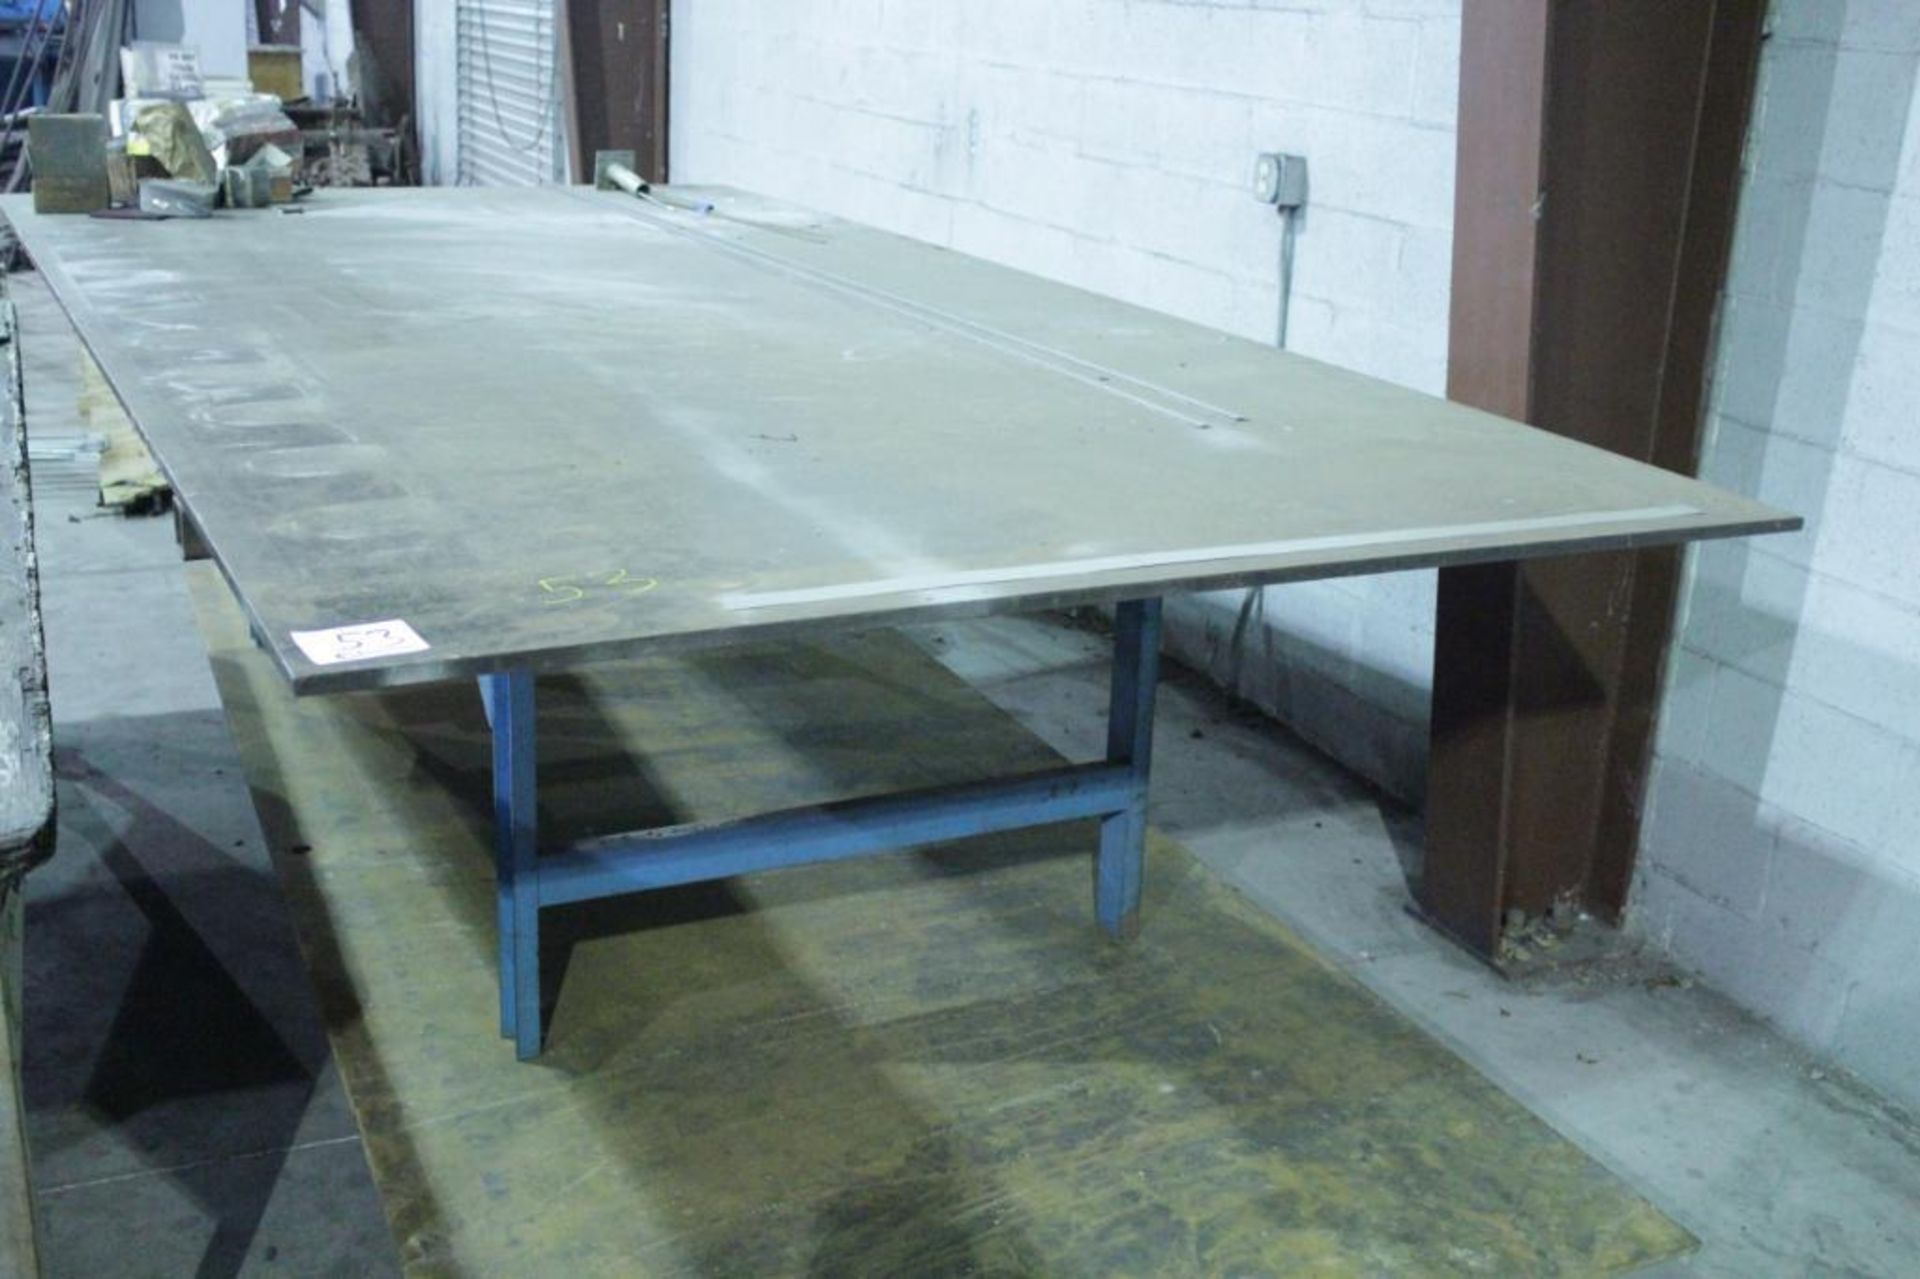 Welding Table 6' x 12' x 10', 3/4" plate top